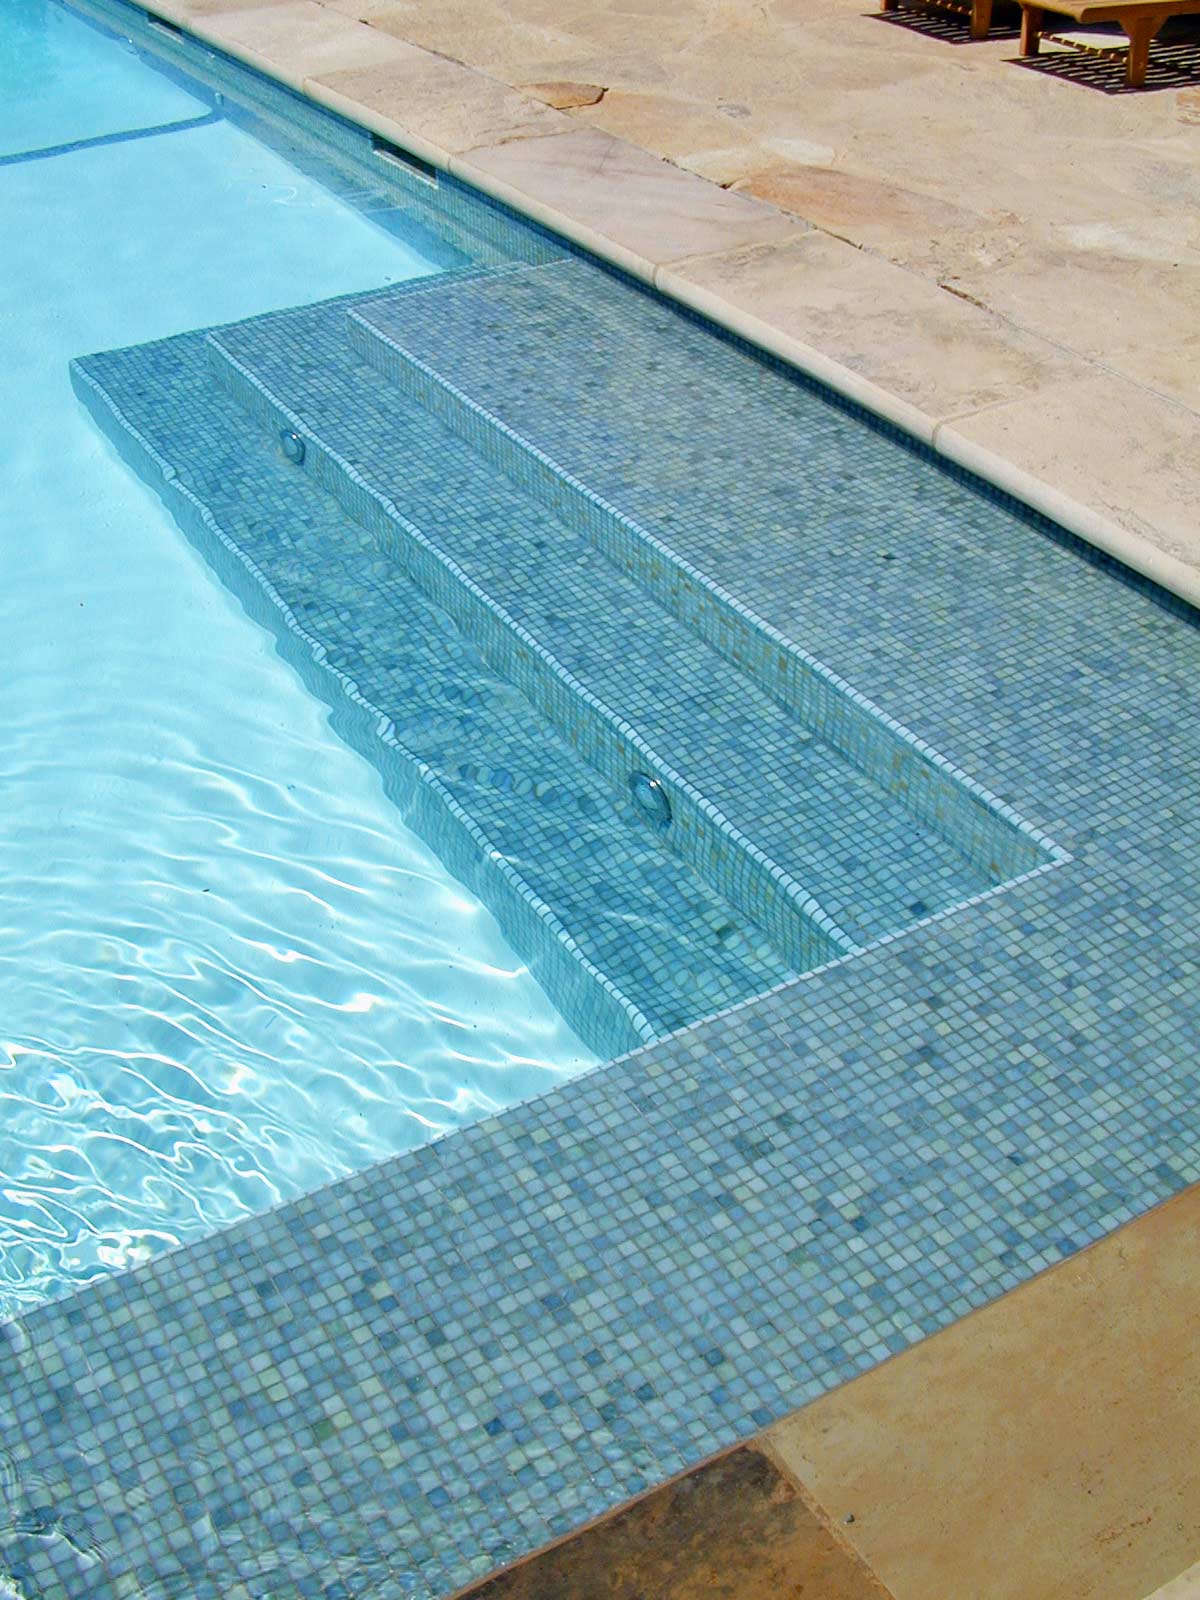 Estate Pool stemps with tiled entry